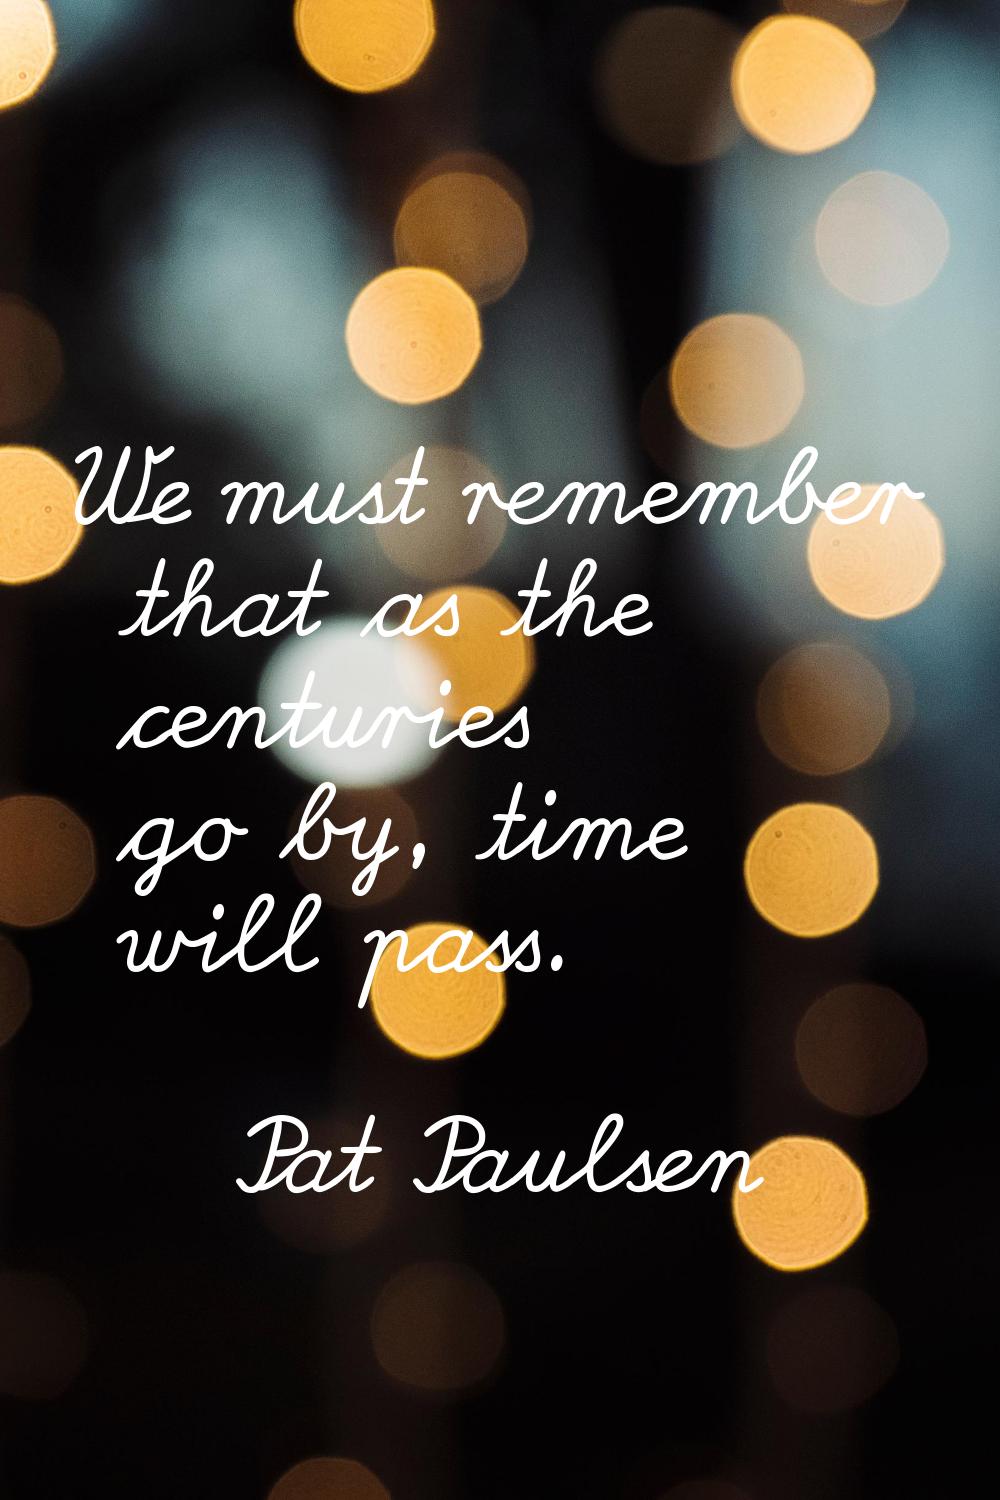 We must remember that as the centuries go by, time will pass.